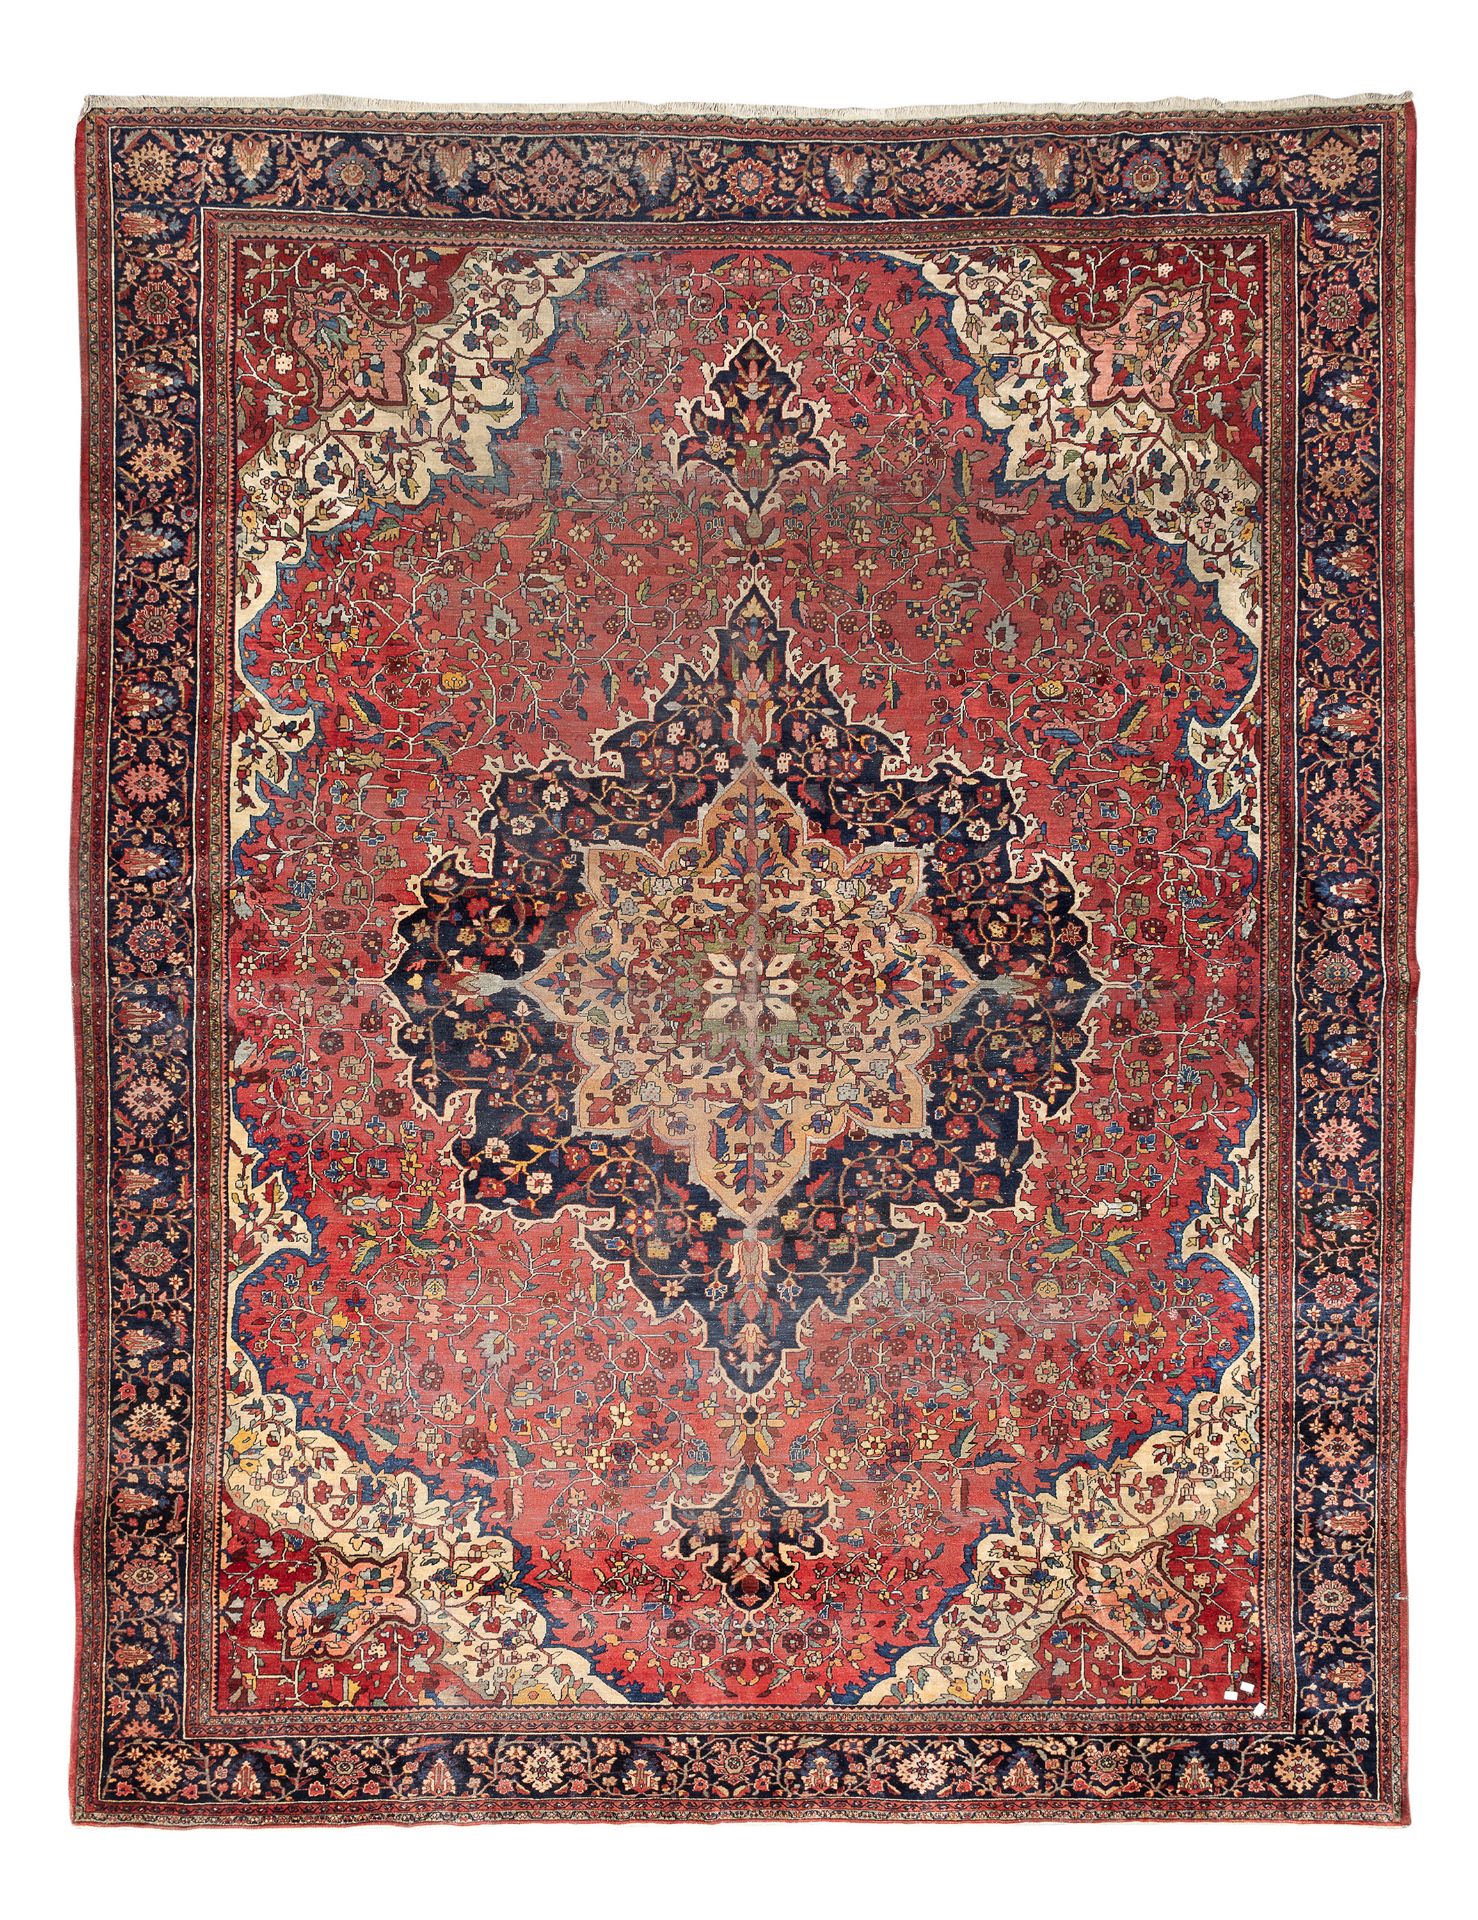 EXCEPTIONAL PERSIAN FEHERAGAN CARPET LATE 19th EARLY 20TH CENTURY